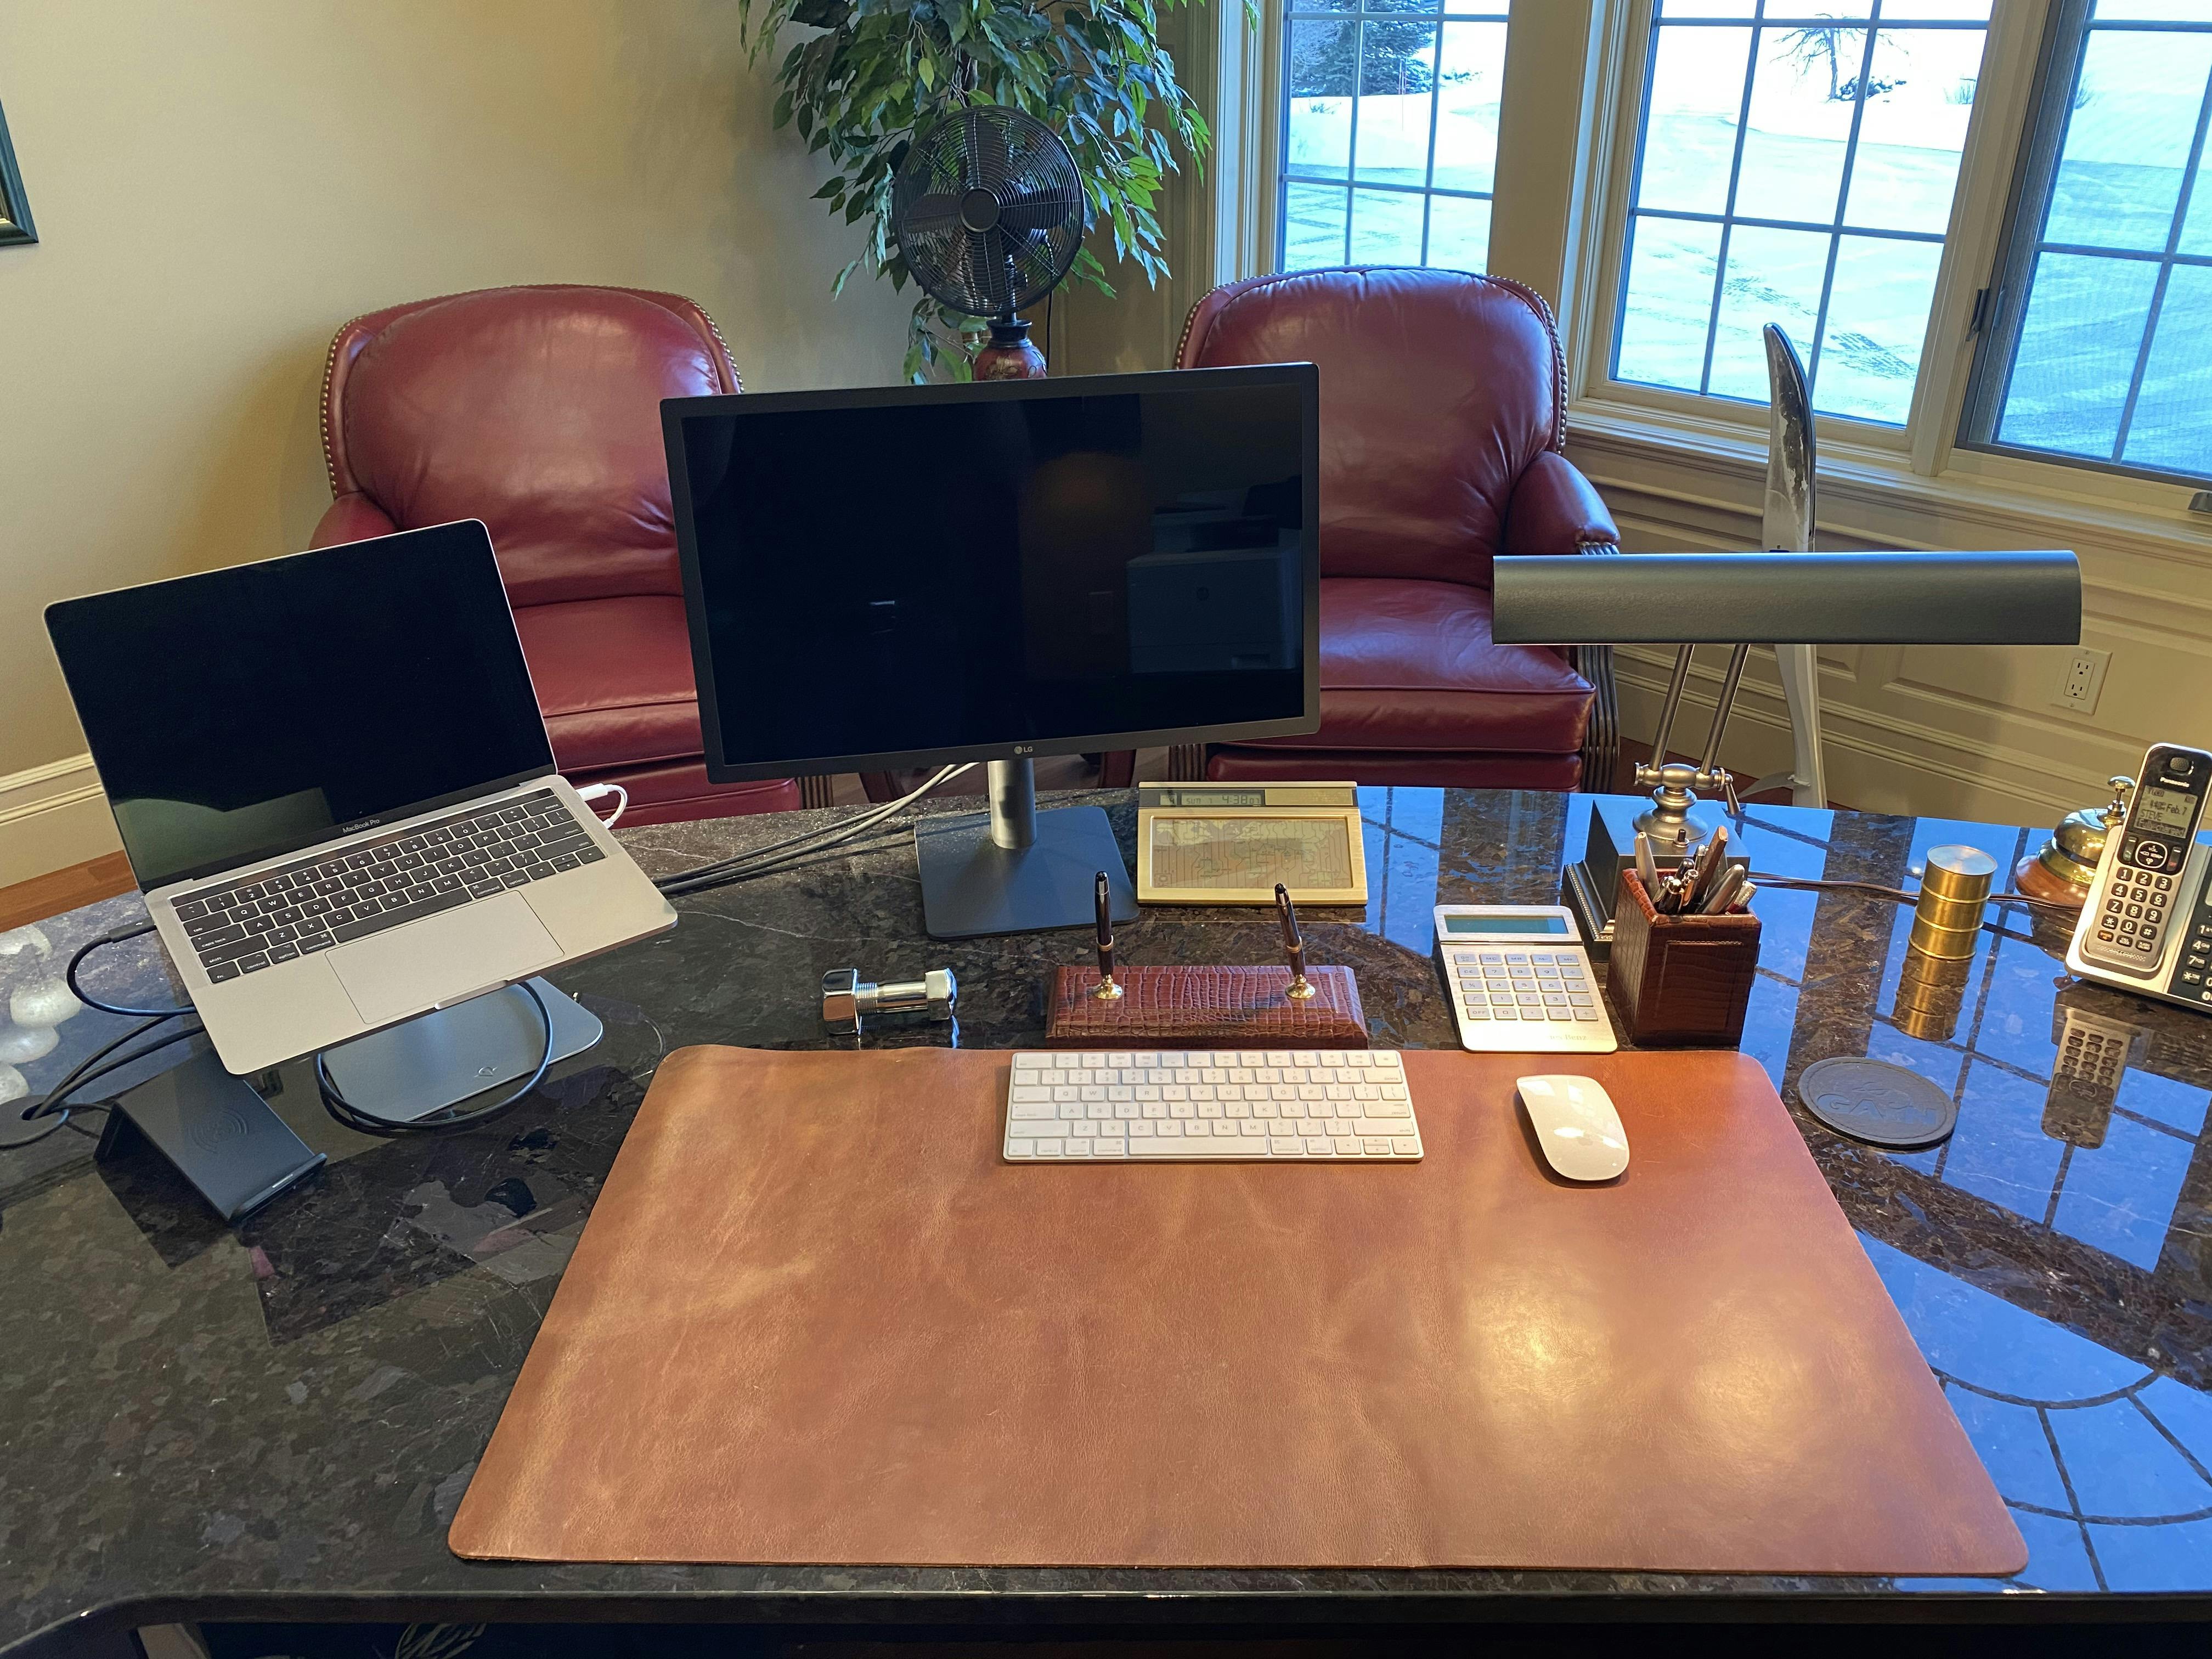 best leather desk pad